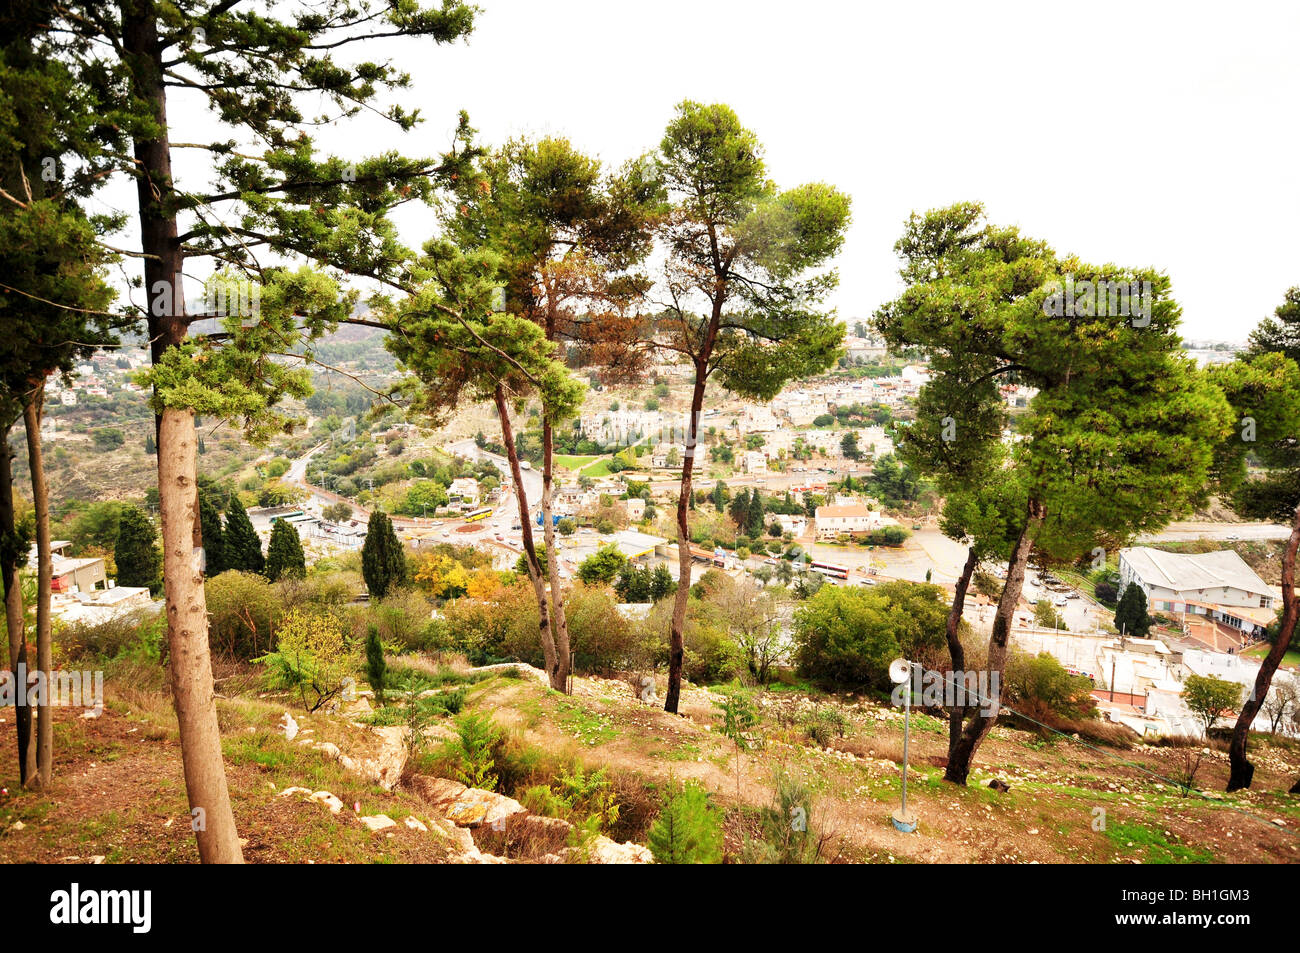 Israel, Upper Galilee, Tzfat, General view of the city Stock Photo